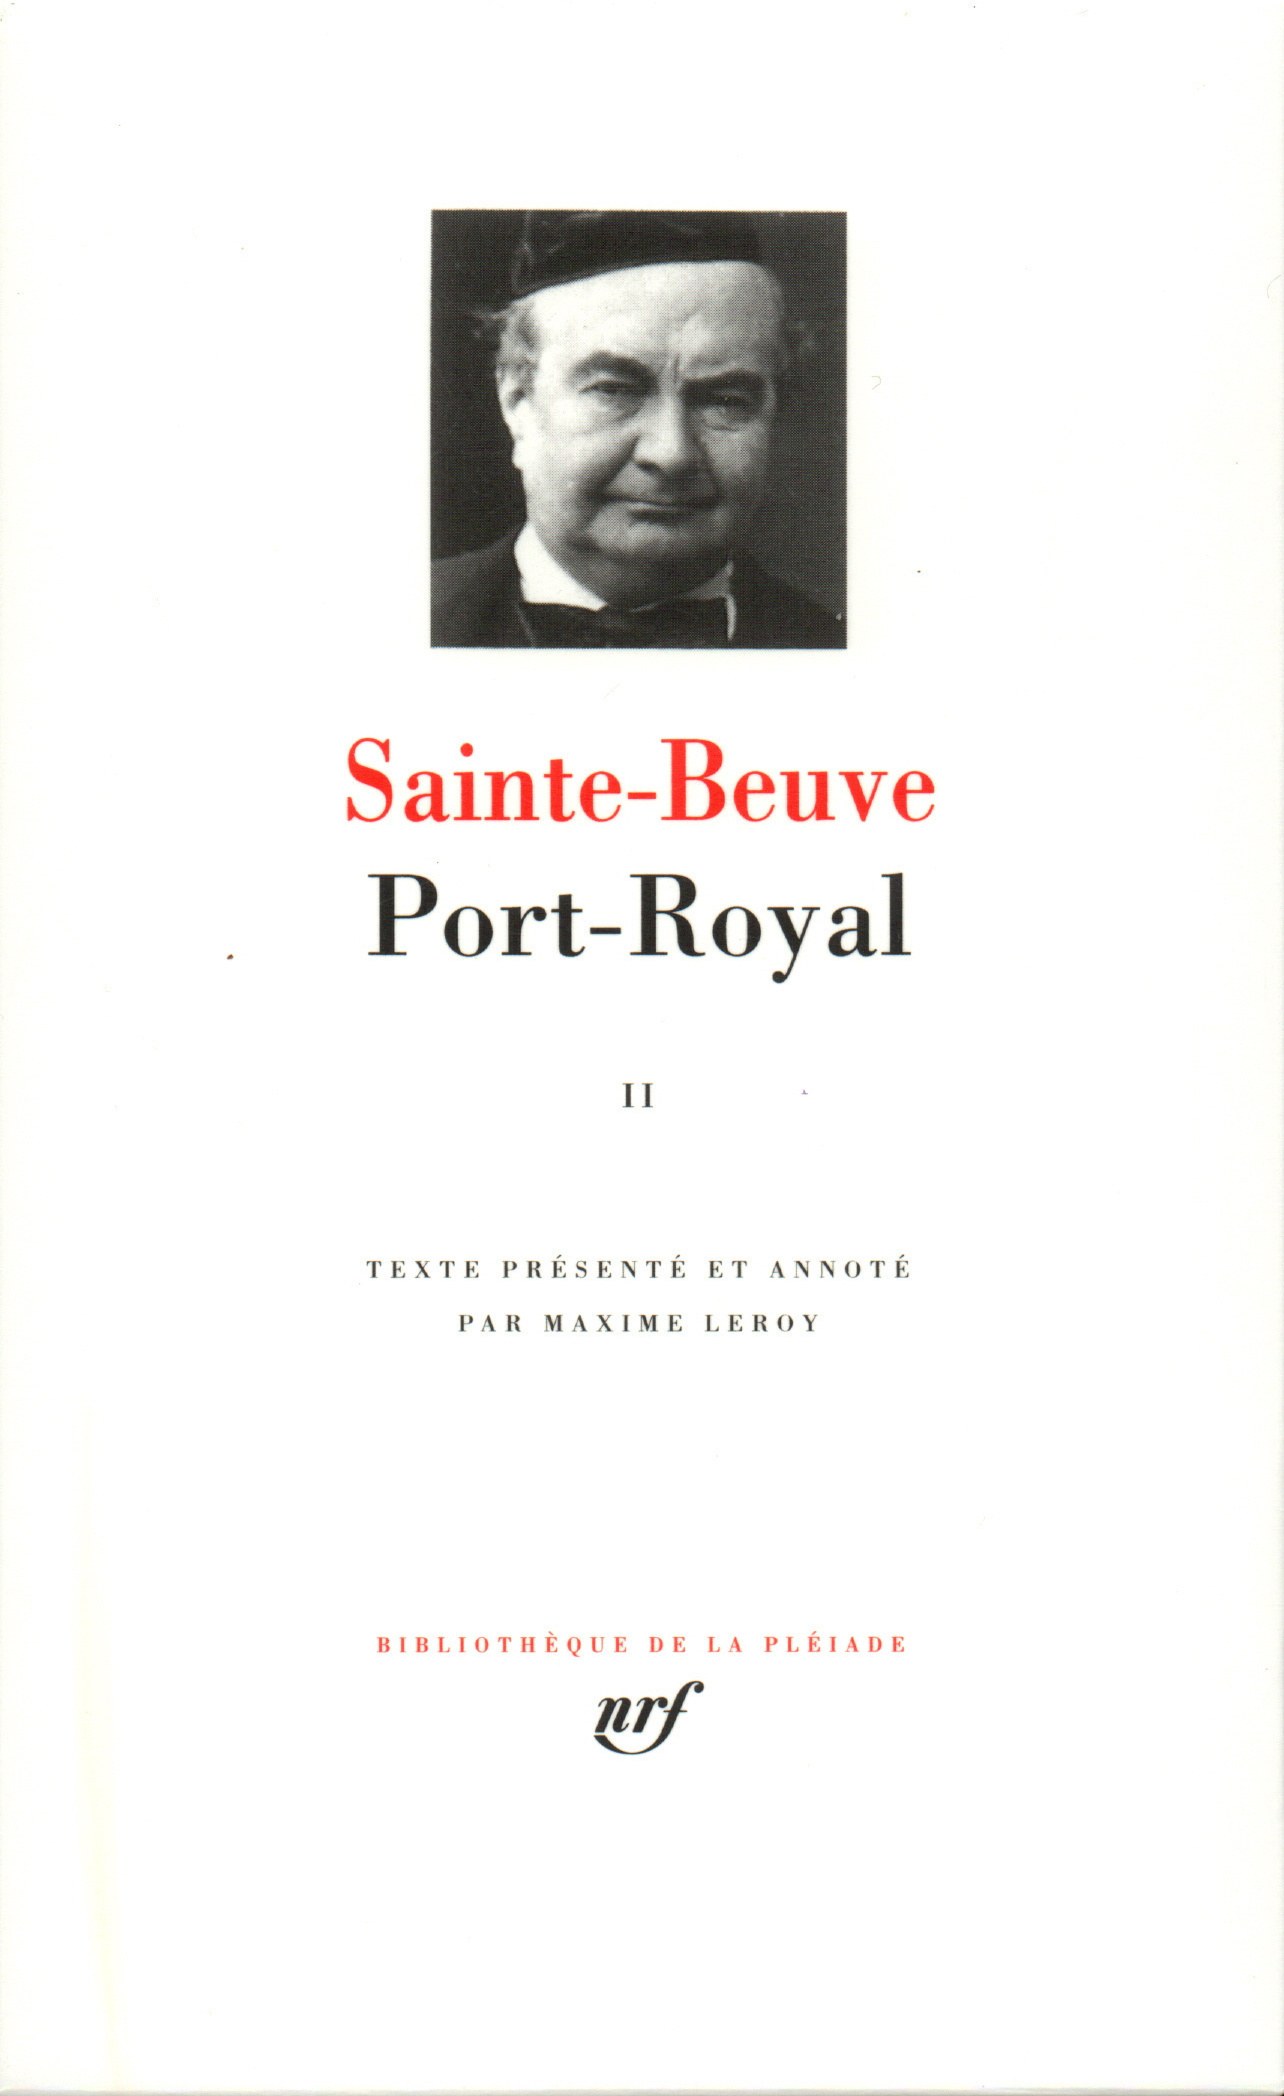 Port-Royal (9782070104963-front-cover)